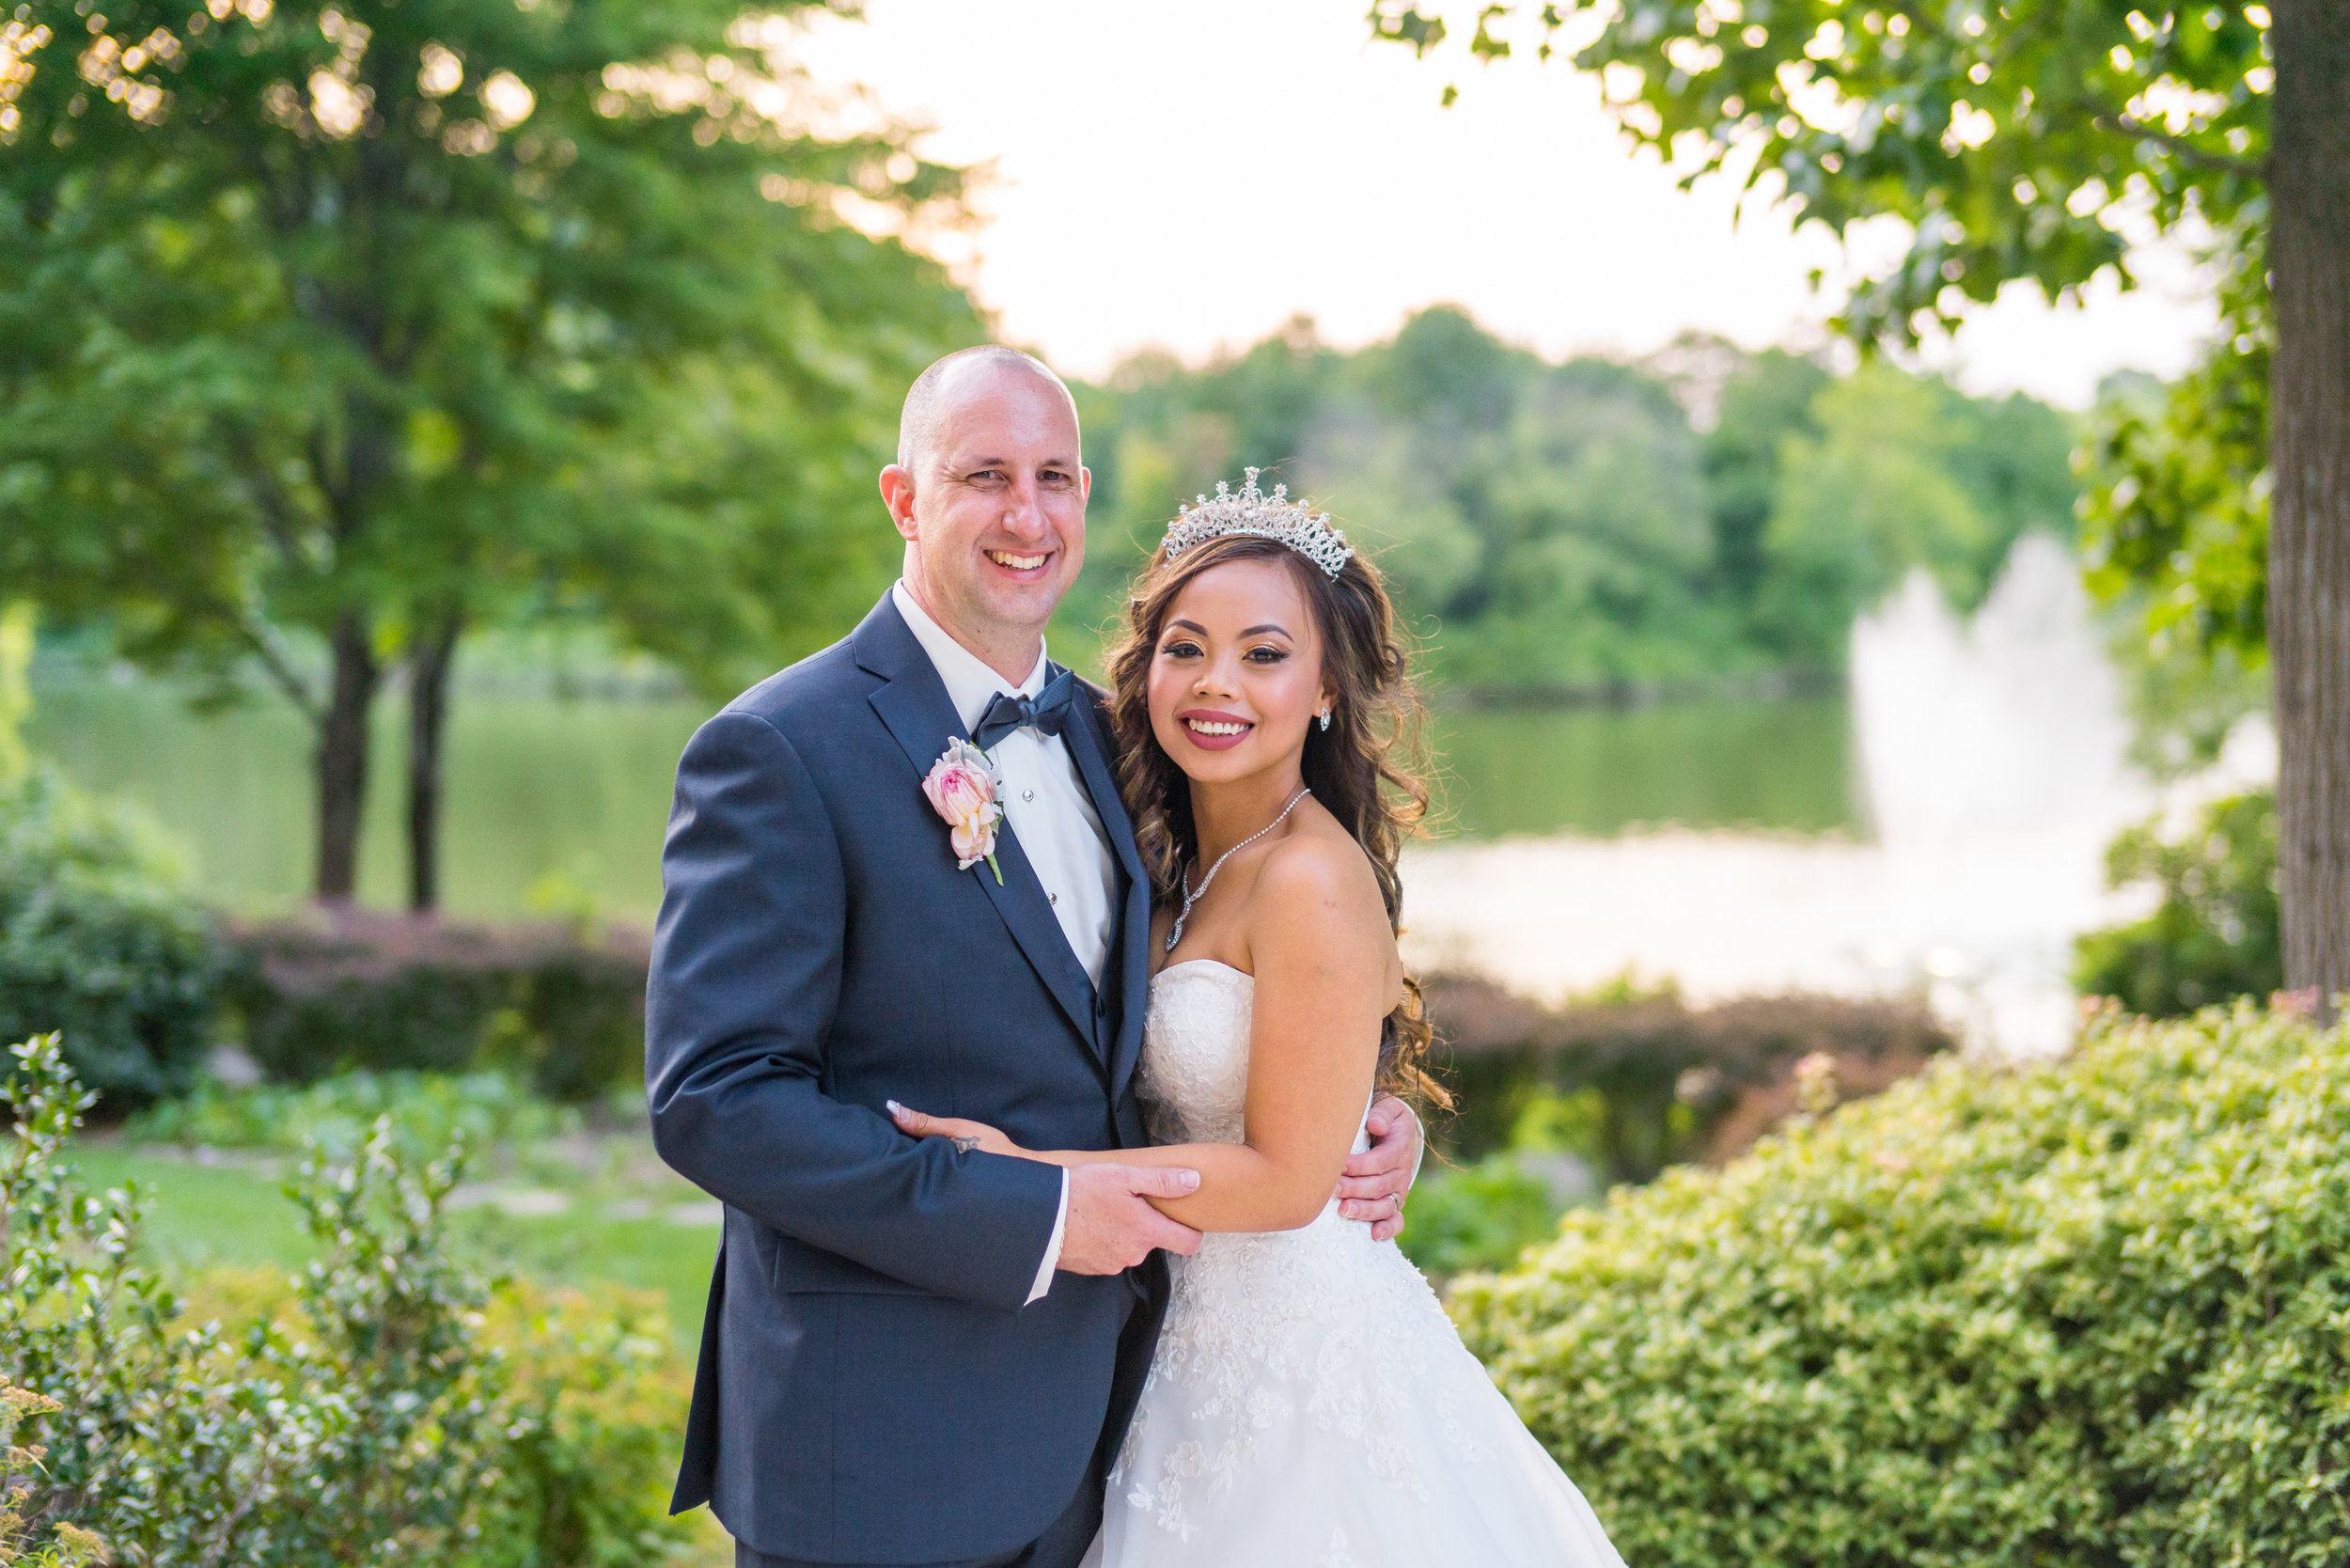 Sunset portraits of bride and groom at 2941